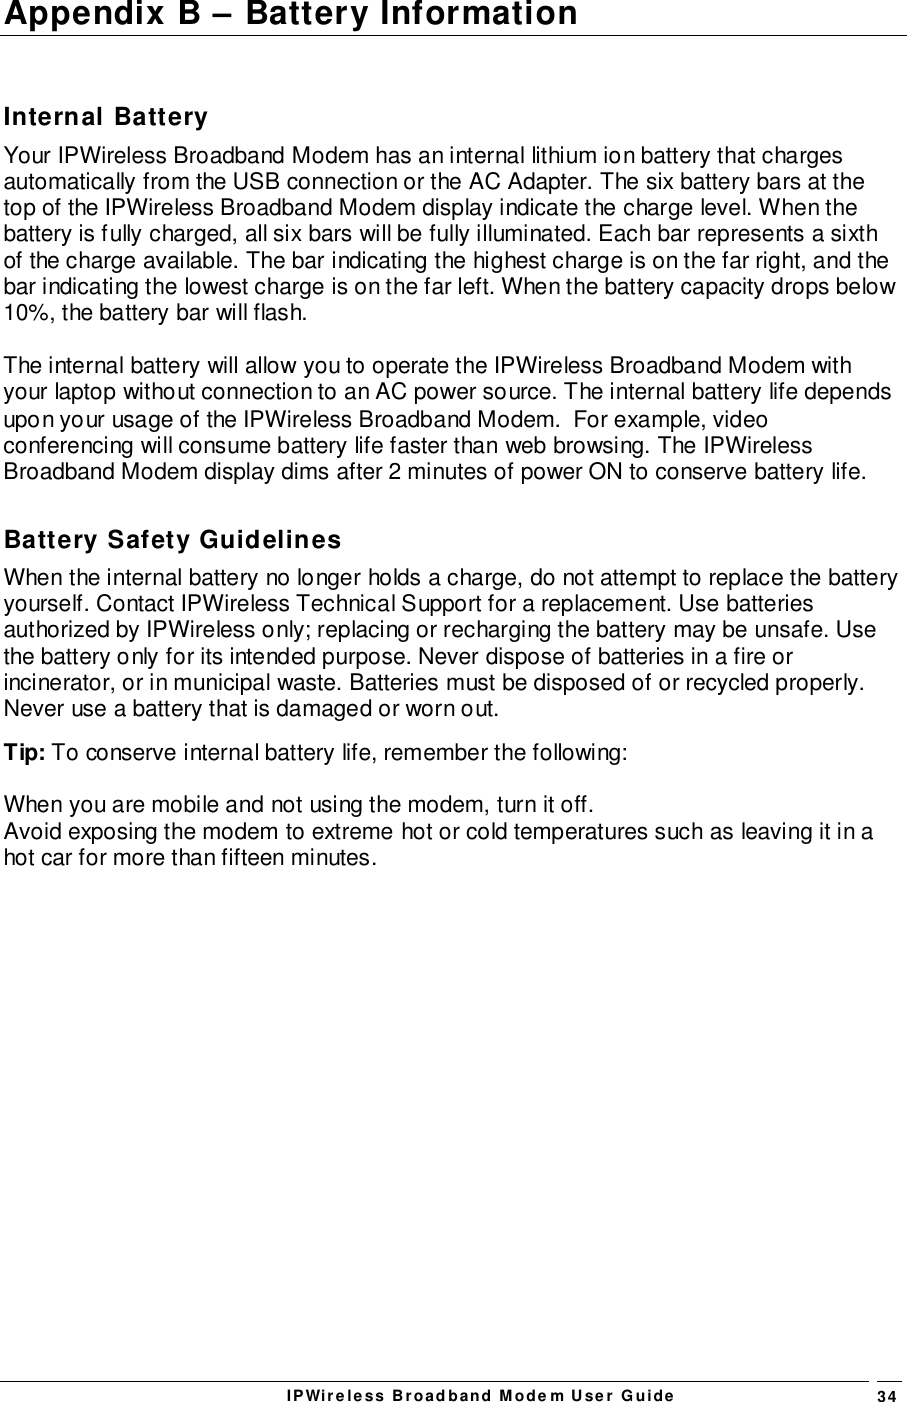 IPWireless Broadband Modem User Guide 34Appendix B – Battery InformationInternal BatteryYour IPWireless Broadband Modem has an internal lithium ion battery that chargesautomatically from the USB connection or the AC Adapter. The six battery bars at thetop of the IPWireless Broadband Modem display indicate the charge level. When thebattery is fully charged, all six bars will be fully illuminated. Each bar represents a sixthof the charge available. The bar indicating the highest charge is on the far right, and thebar indicating the lowest charge is on the far left. When the battery capacity drops below10%, the battery bar will flash.The internal battery will allow you to operate the IPWireless Broadband Modem withyour laptop without connection to an AC power source. The internal battery life dependsupon your usage of the IPWireless Broadband Modem.  For example, videoconferencing will consume battery life faster than web browsing. The IPWirelessBroadband Modem display dims after 2 minutes of power ON to conserve battery life.Battery Safety GuidelinesWhen the internal battery no longer holds a charge, do not attempt to replace the batteryyourself. Contact IPWireless Technical Support for a replacement. Use batteriesauthorized by IPWireless only; replacing or recharging the battery may be unsafe. Usethe battery only for its intended purpose. Never dispose of batteries in a fire orincinerator, or in municipal waste. Batteries must be disposed of or recycled properly.Never use a battery that is damaged or worn out.Tip: To conserve internal battery life, remember the following:When you are mobile and not using the modem, turn it off.Avoid exposing the modem to extreme hot or cold temperatures such as leaving it in ahot car for more than fifteen minutes.